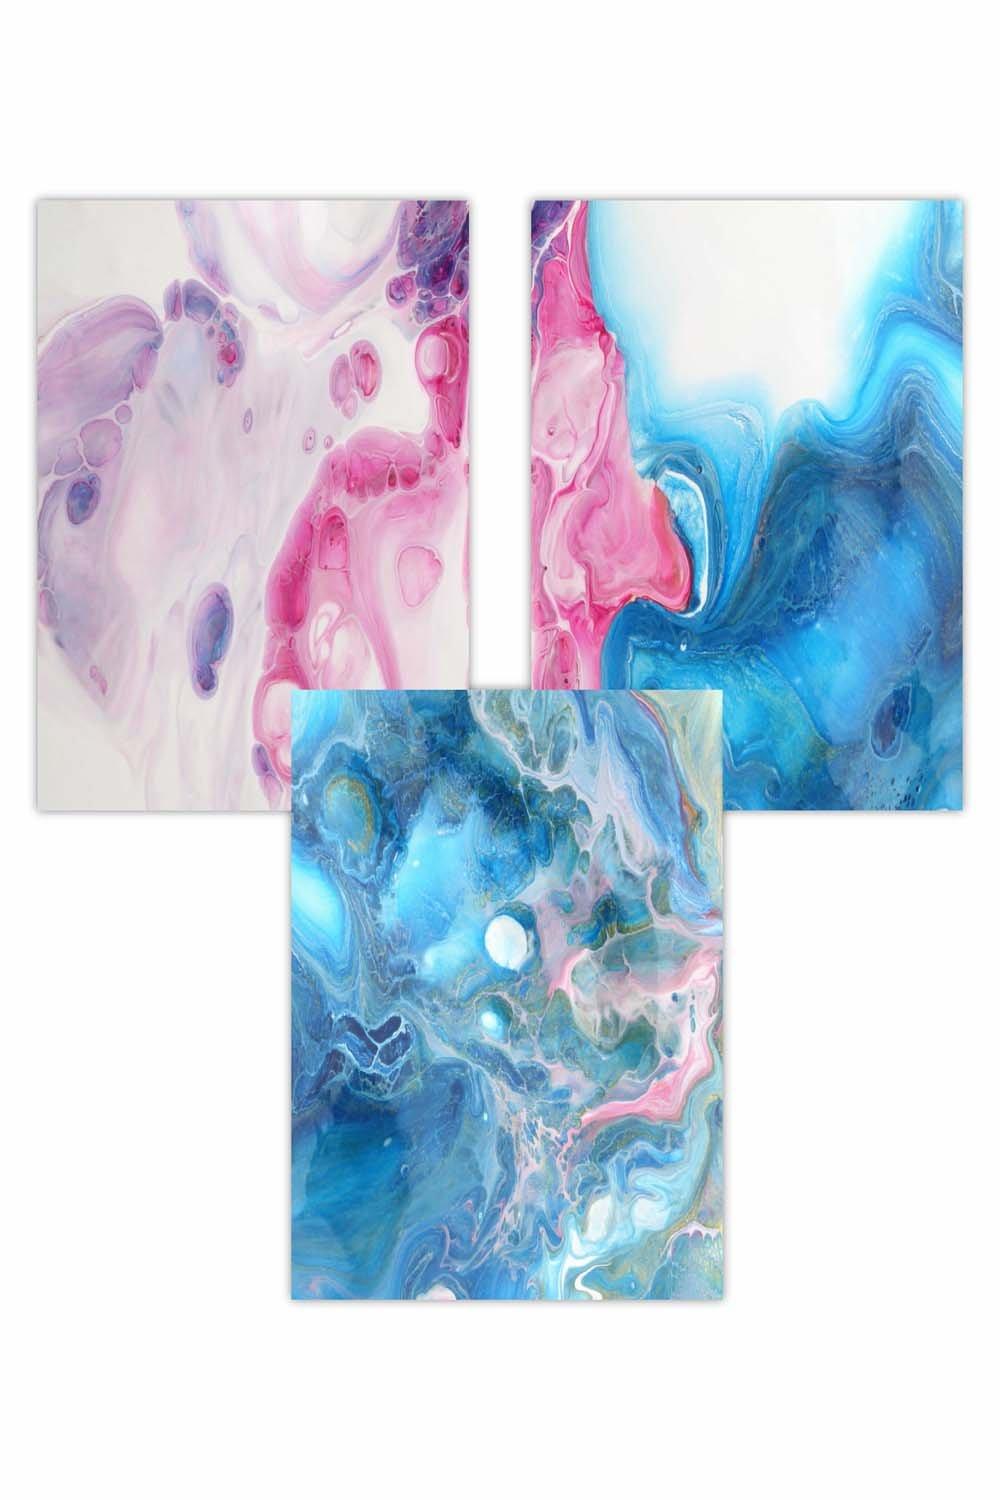 Set of 3 Abstract Fluid Marble in Blue and Pink Art Posters